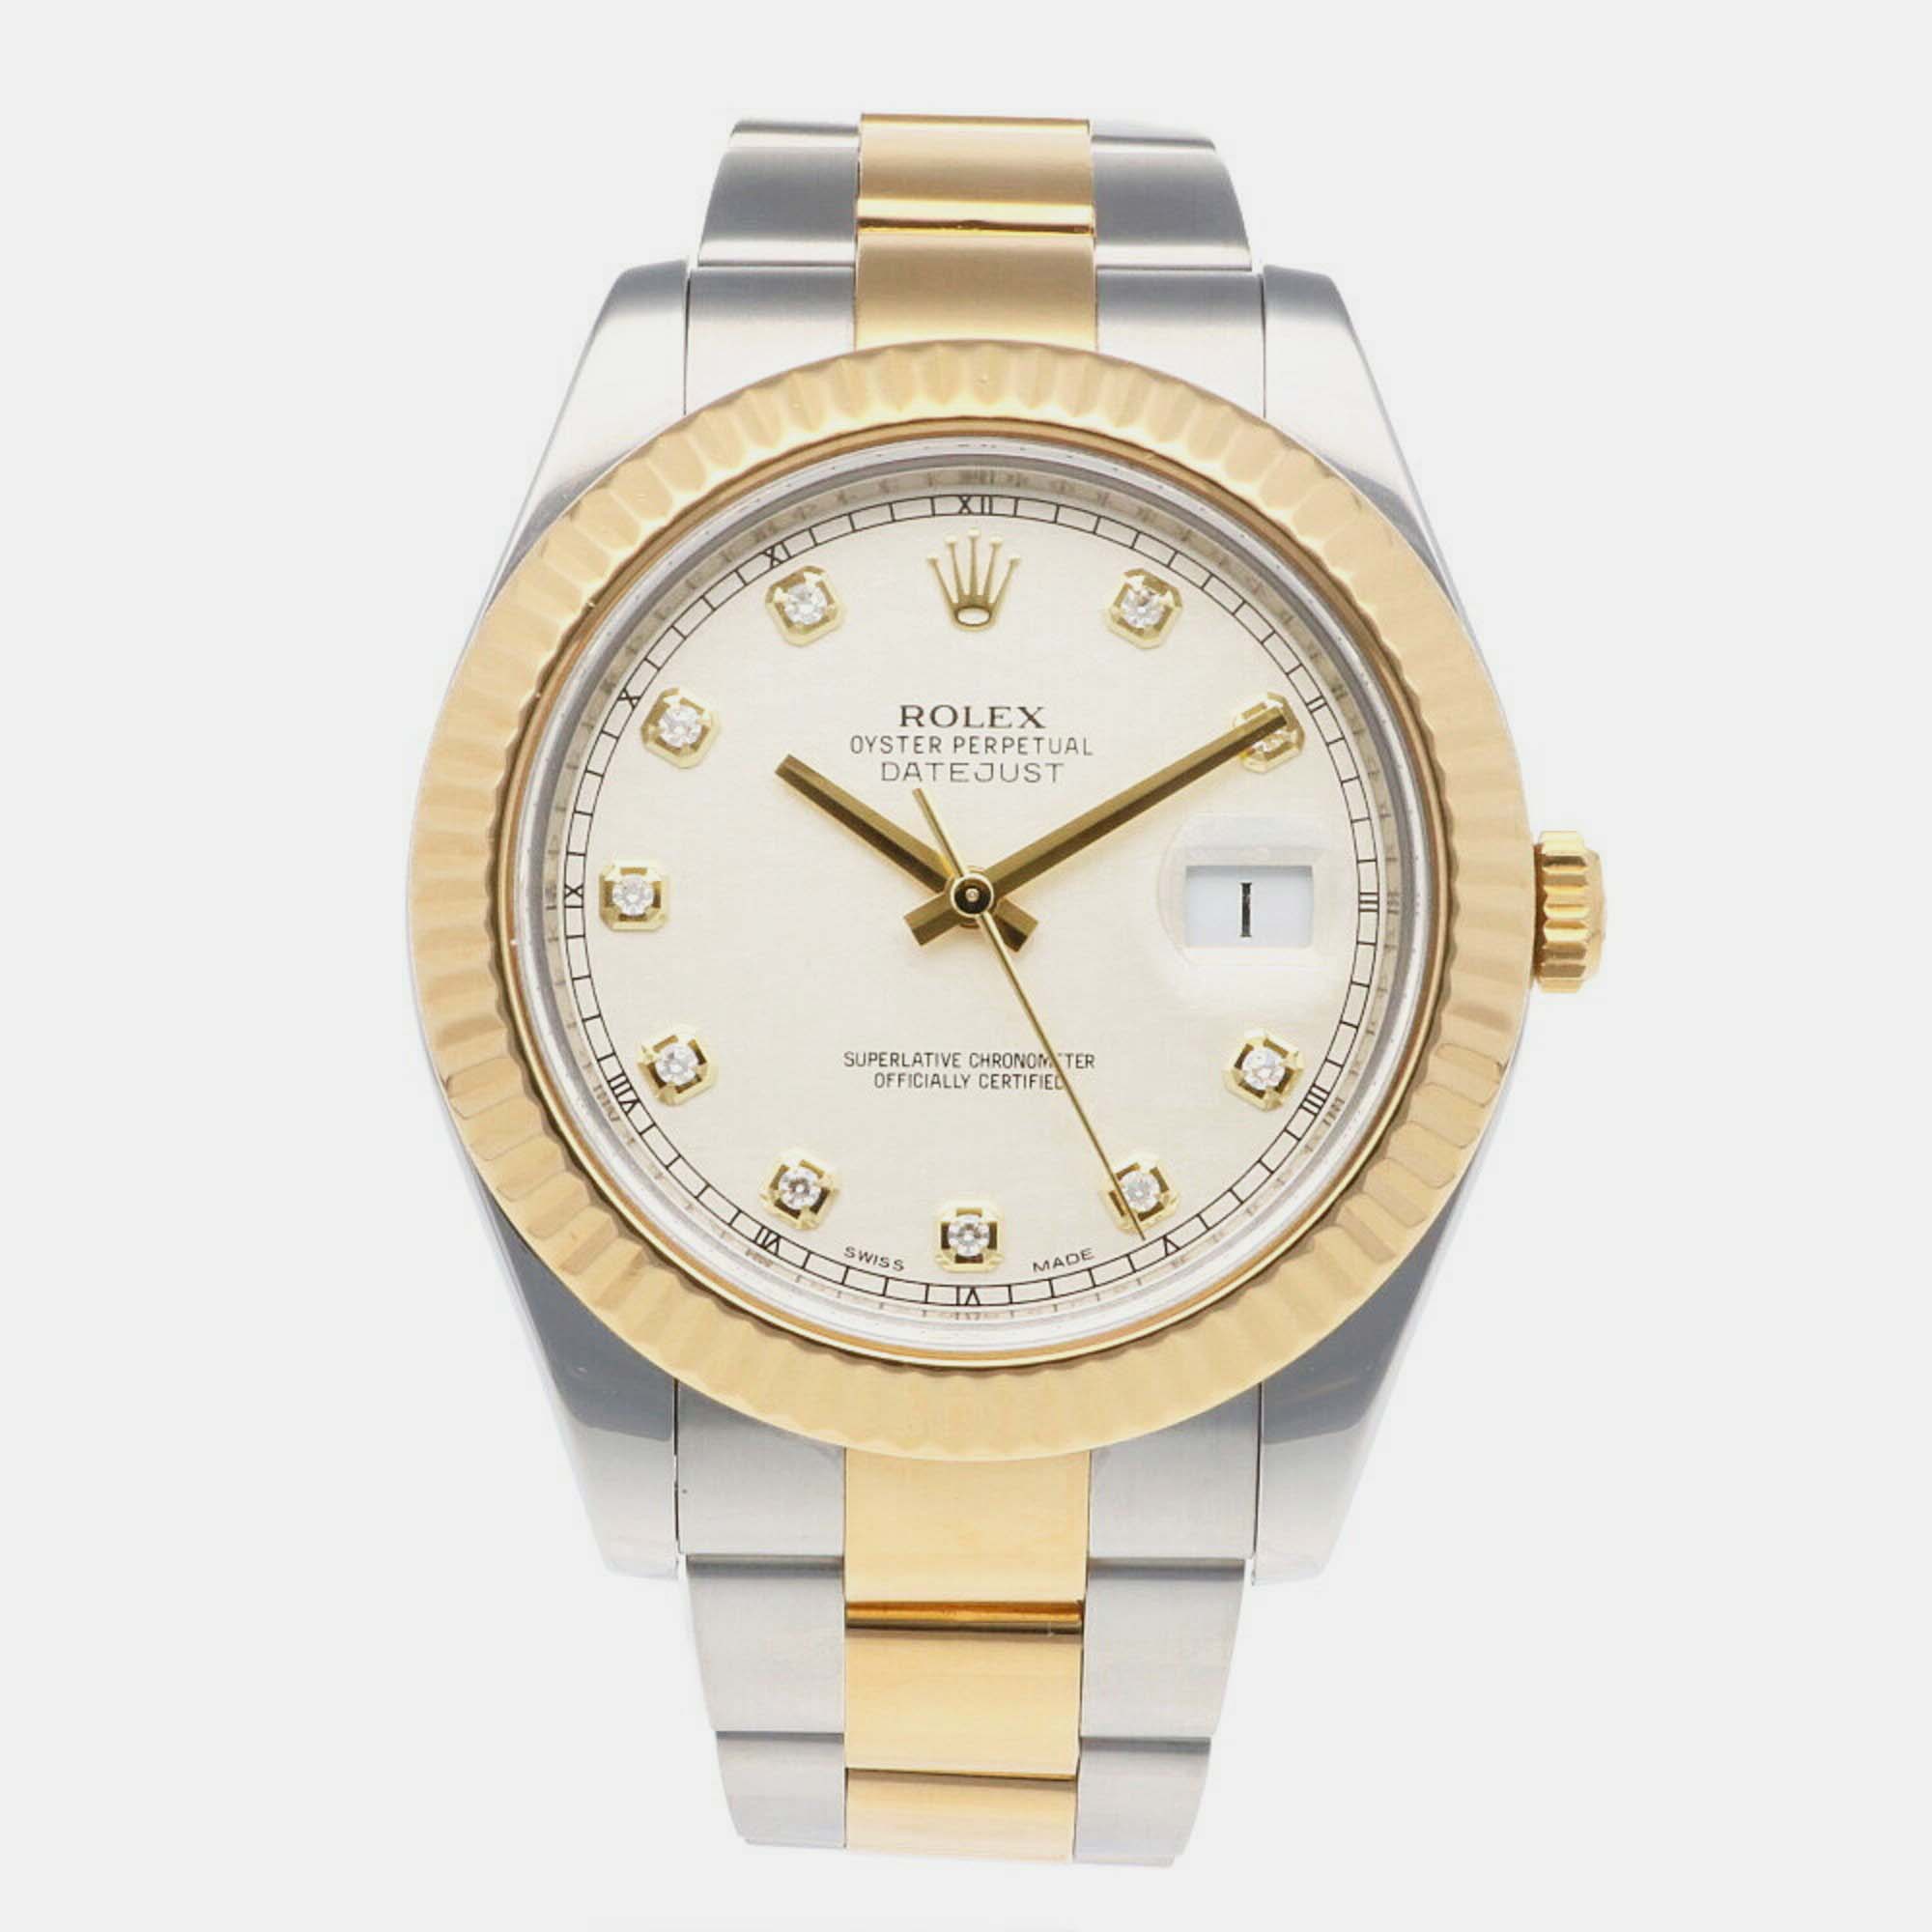 Rolex White 18k Yellow Gold And Stainless Steel Datejust 116333 Automatic Men's Wristwatch 41 Mm